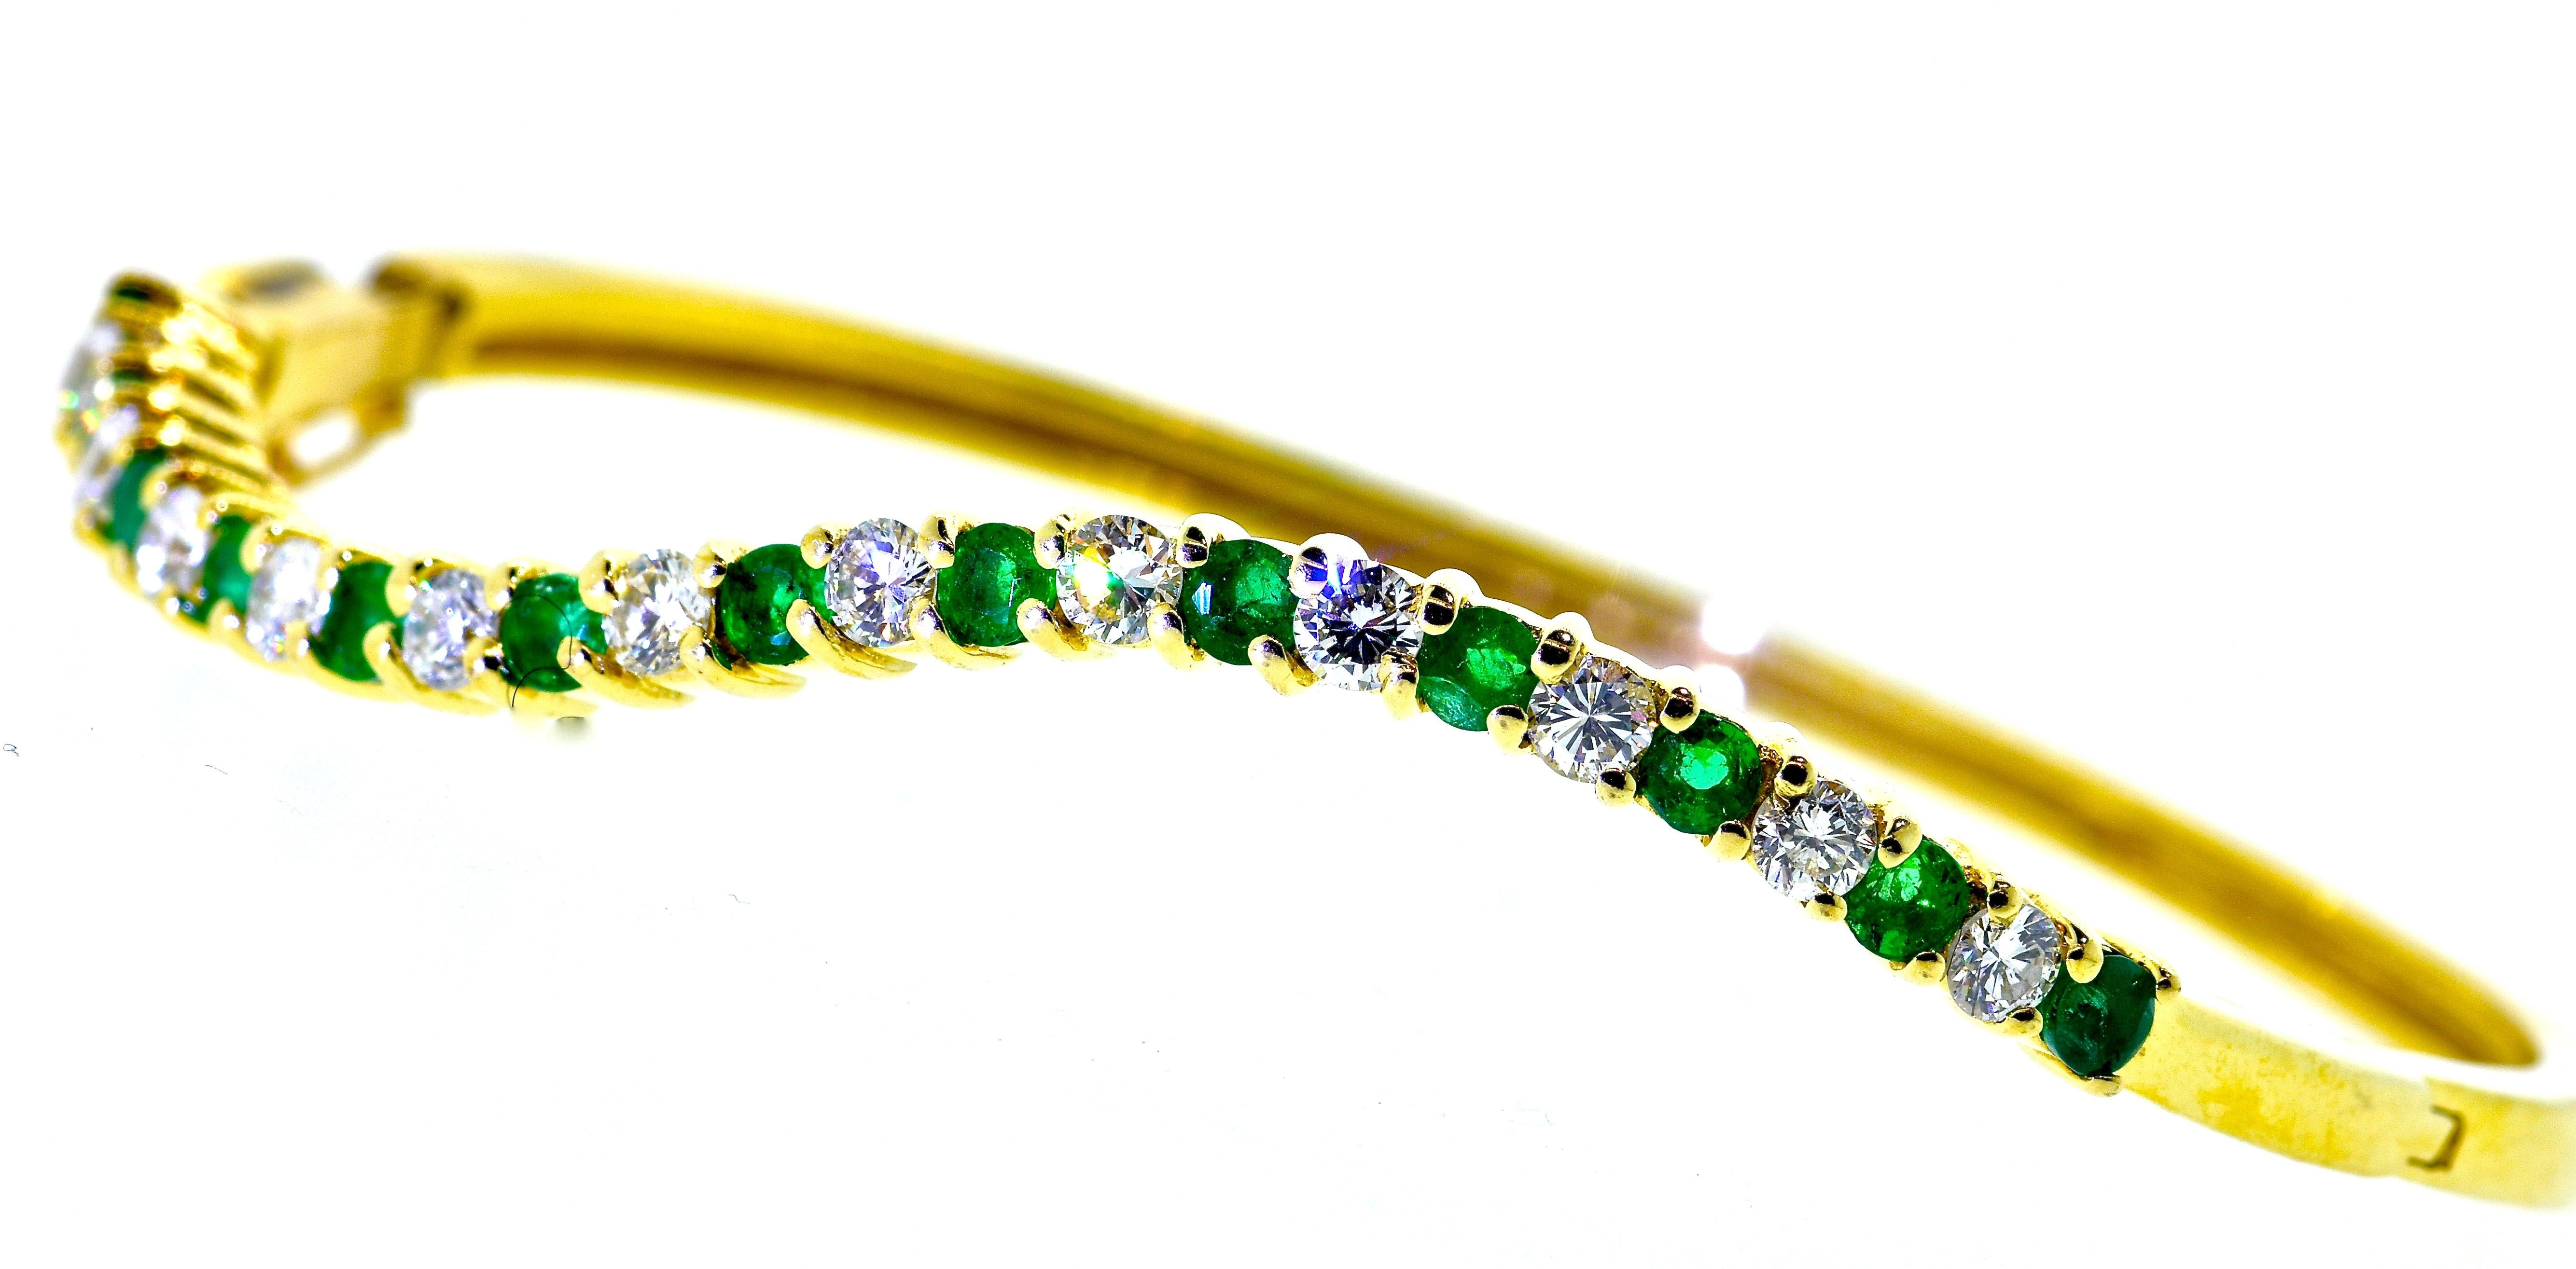 Emerald and diamond bangle bracelet in yellow gold and possessing fine white brilliant cut white diamonds all well cut and well matched.  These 12 diamonds are estimated to weigh 1.0 cts.  There are 13 fine bright green natural emeralds.  These